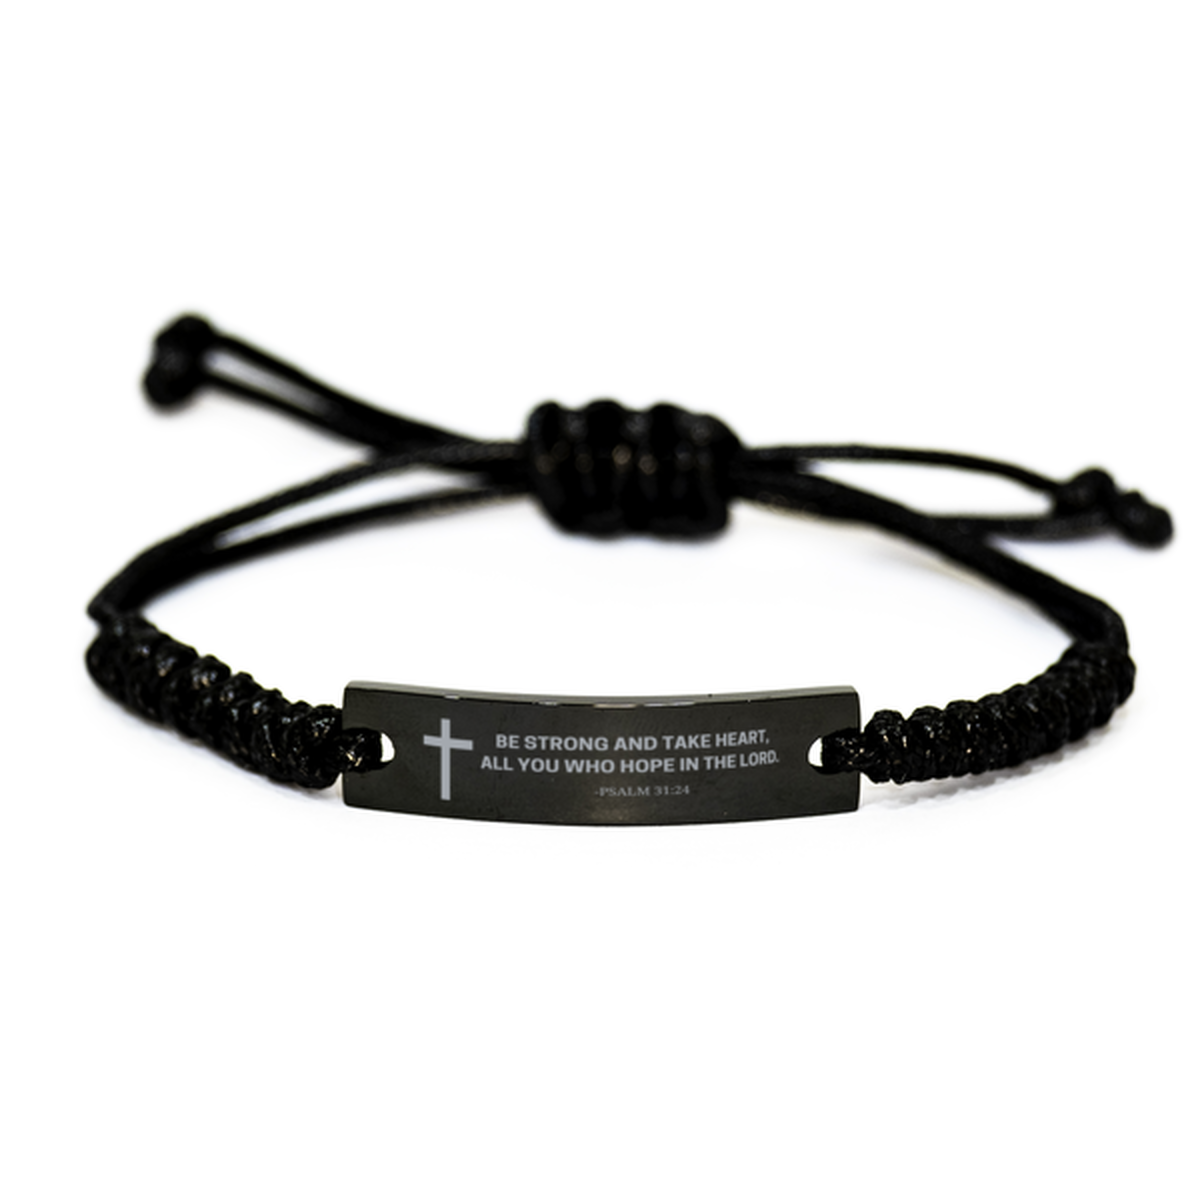 Baptism Gifts For Teenage Boys Girls, Christian Bible Verse Black Rope Bracelet, Be strong and take heart, Catholic Confirmation Gifts for Son, Godson, Grandson, Nephew